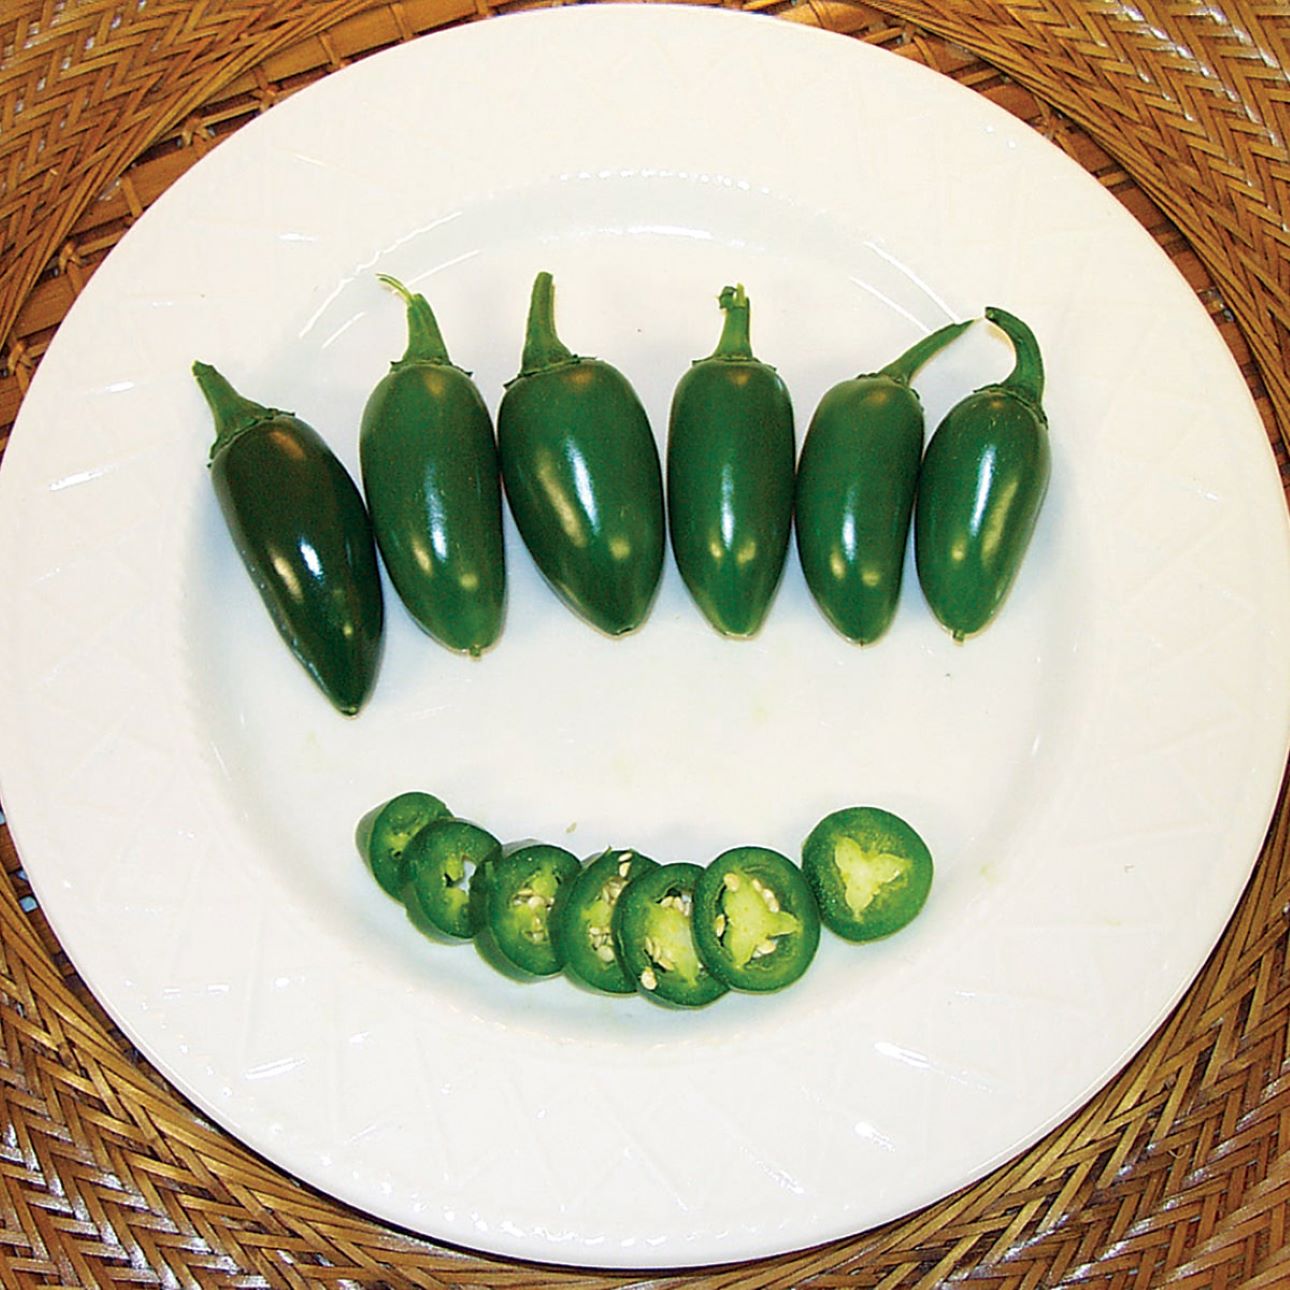 How To Store Jalapeno Seeds